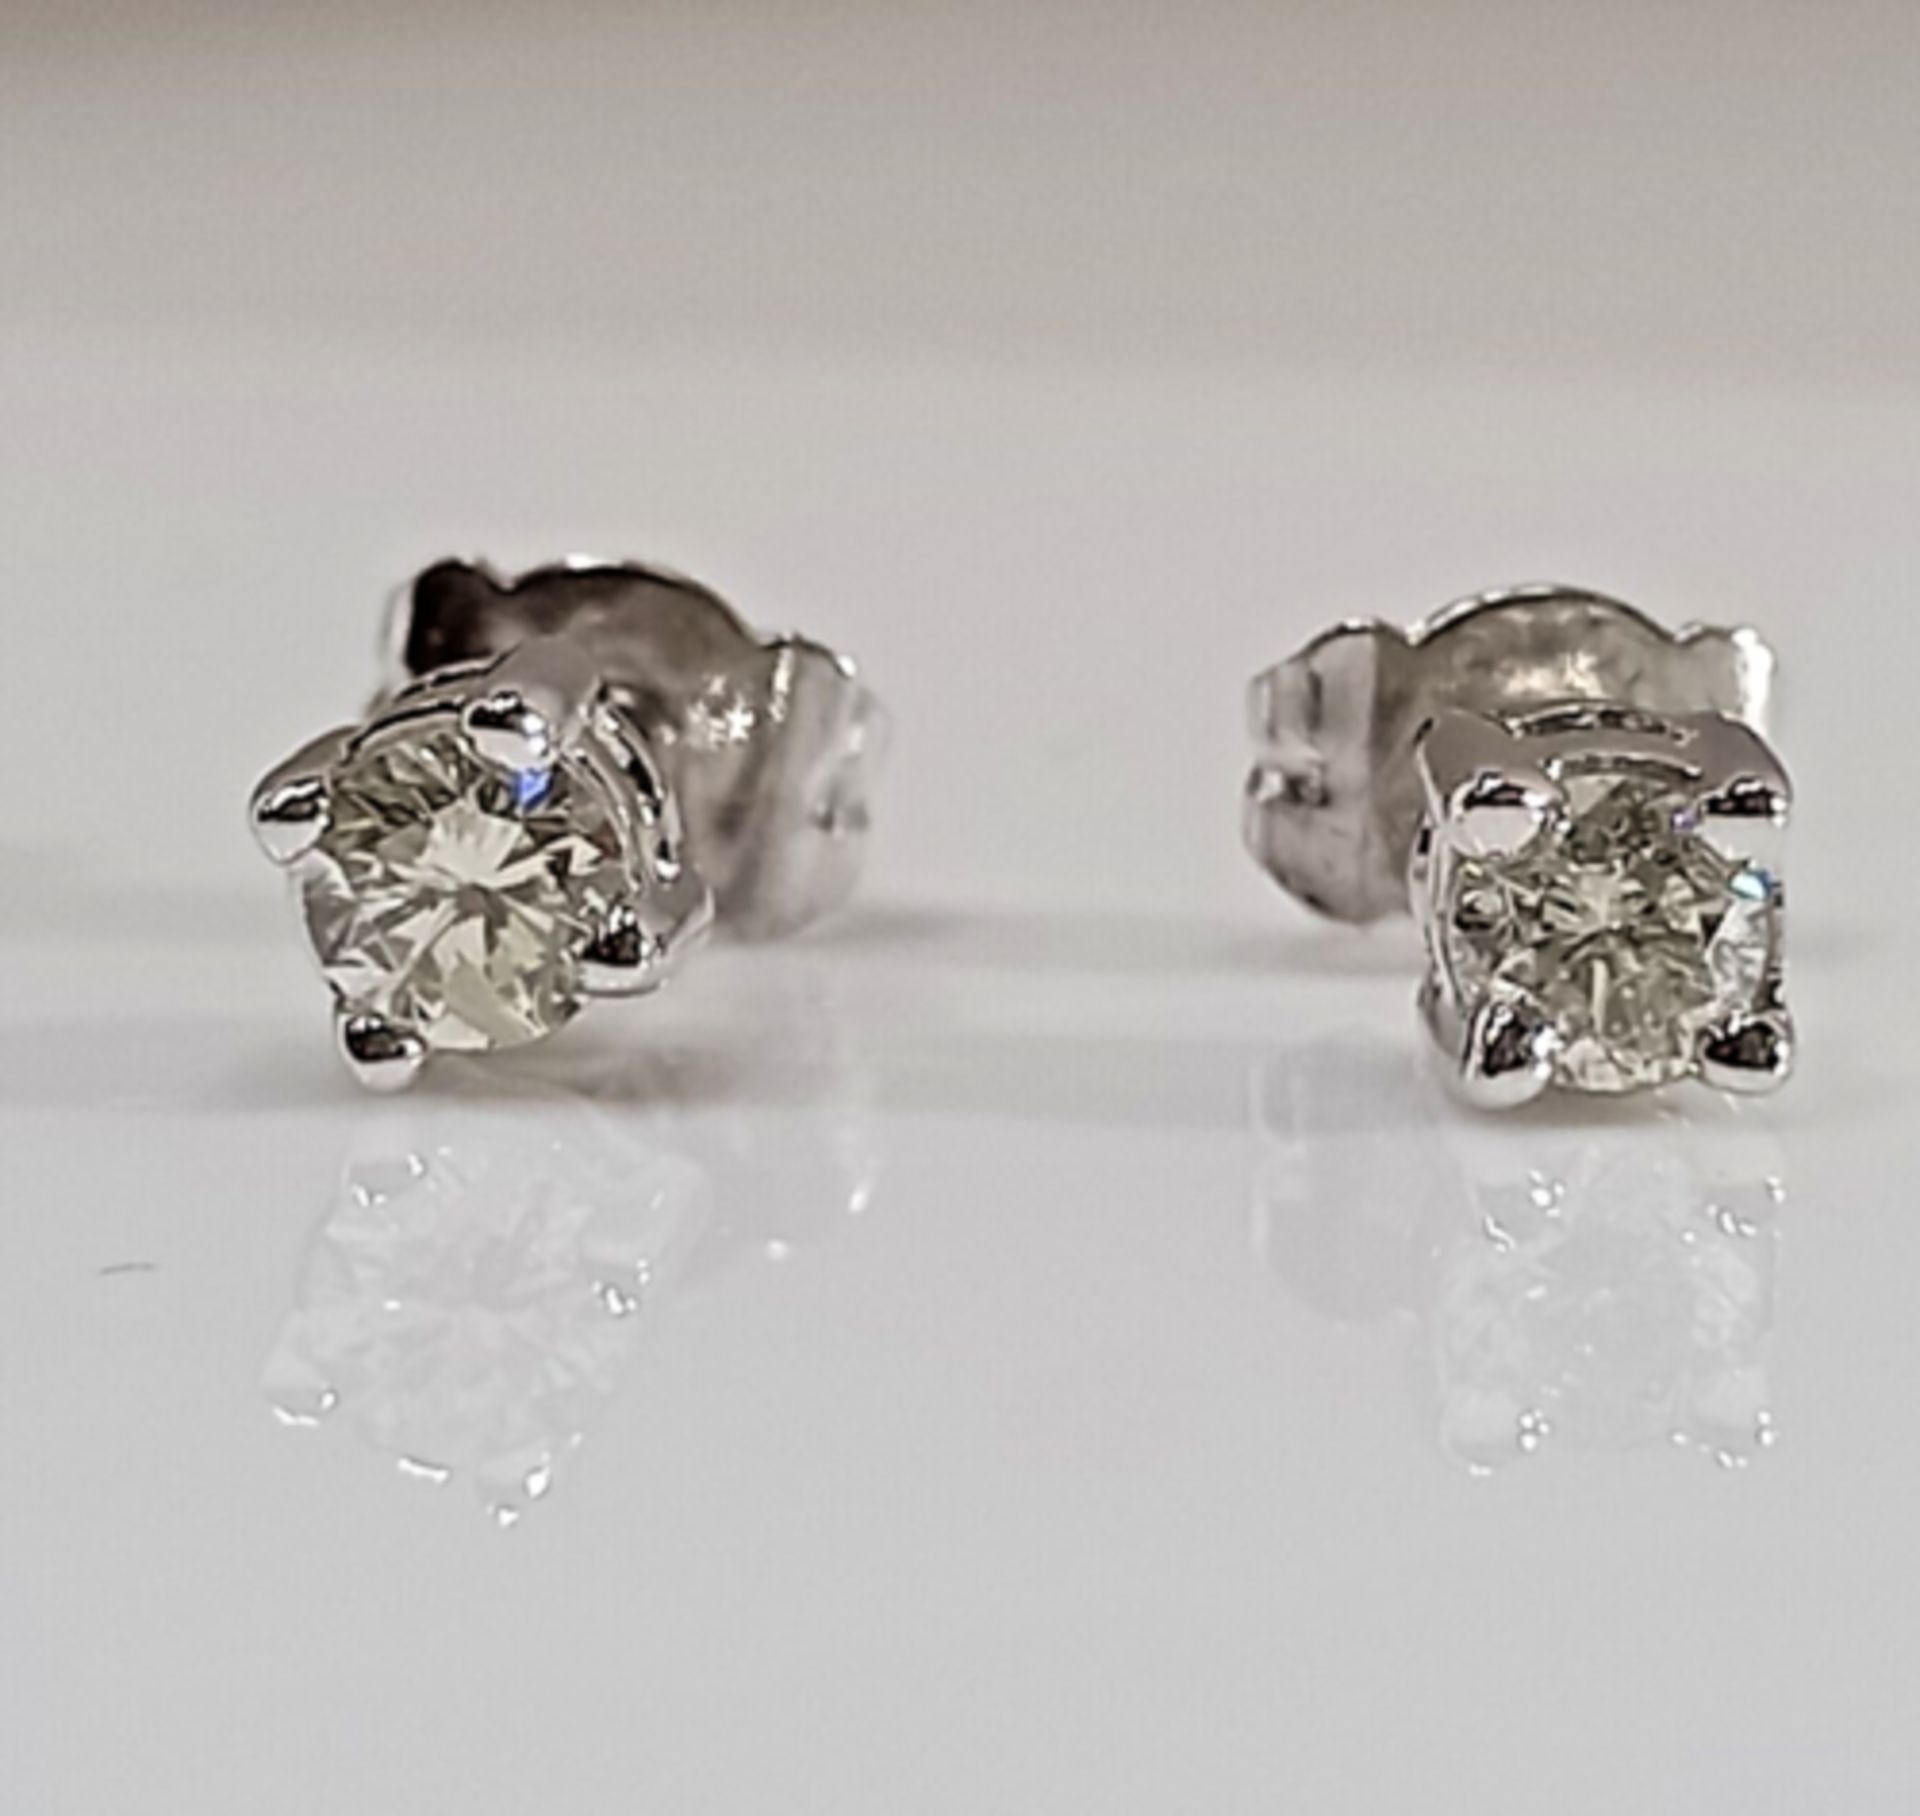 0.50CT DIAMOND STUD EARRINGS 18CT WHITE GOLD IN GIFT BOX WITH VALUATION CERTIFICATE OF £2495